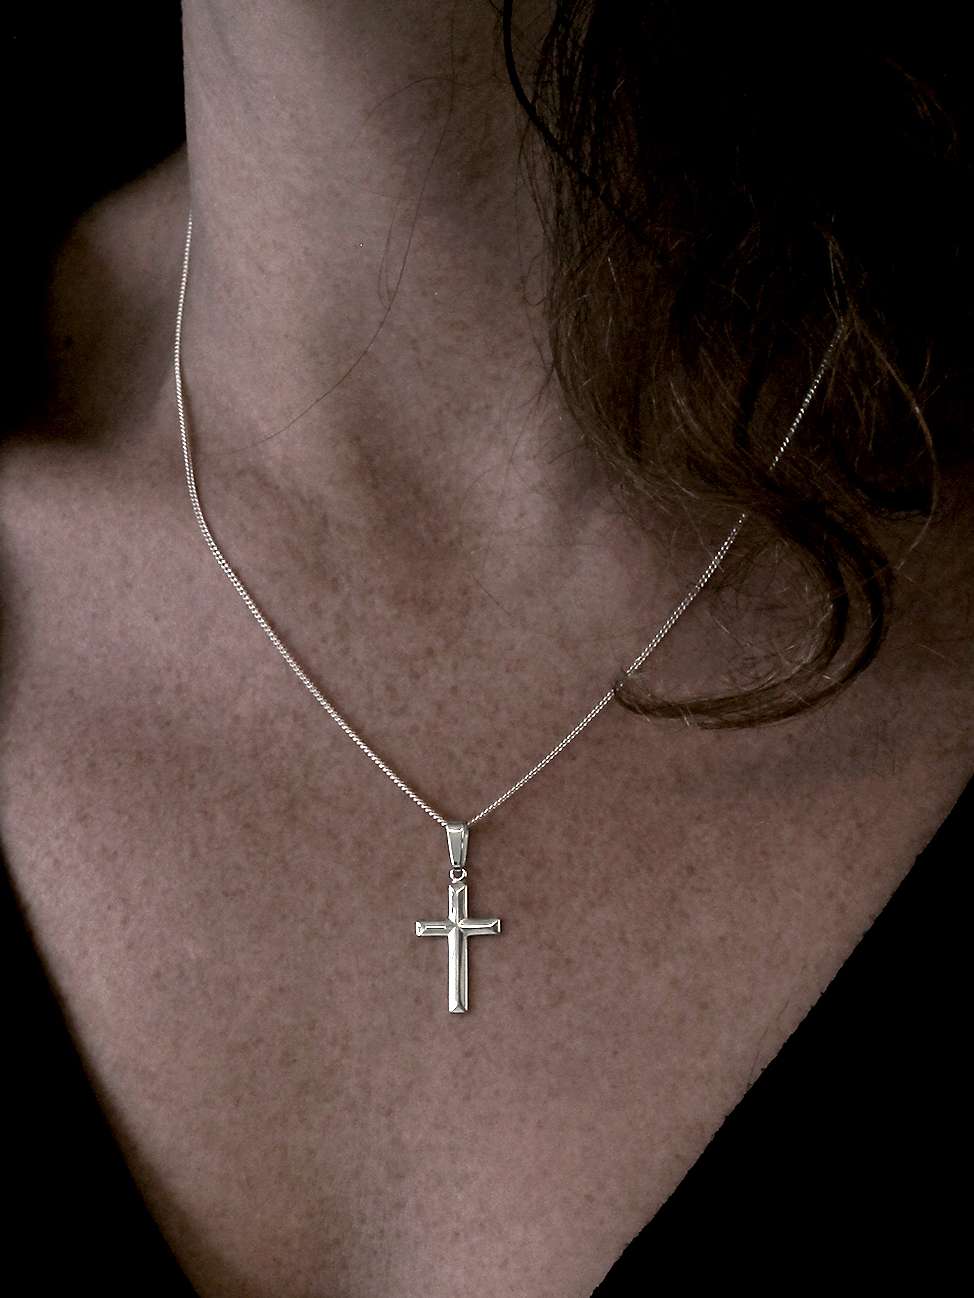 Buy Nina B Silver Polished Cross Pendant Necklace, Silver Online at johnlewis.com